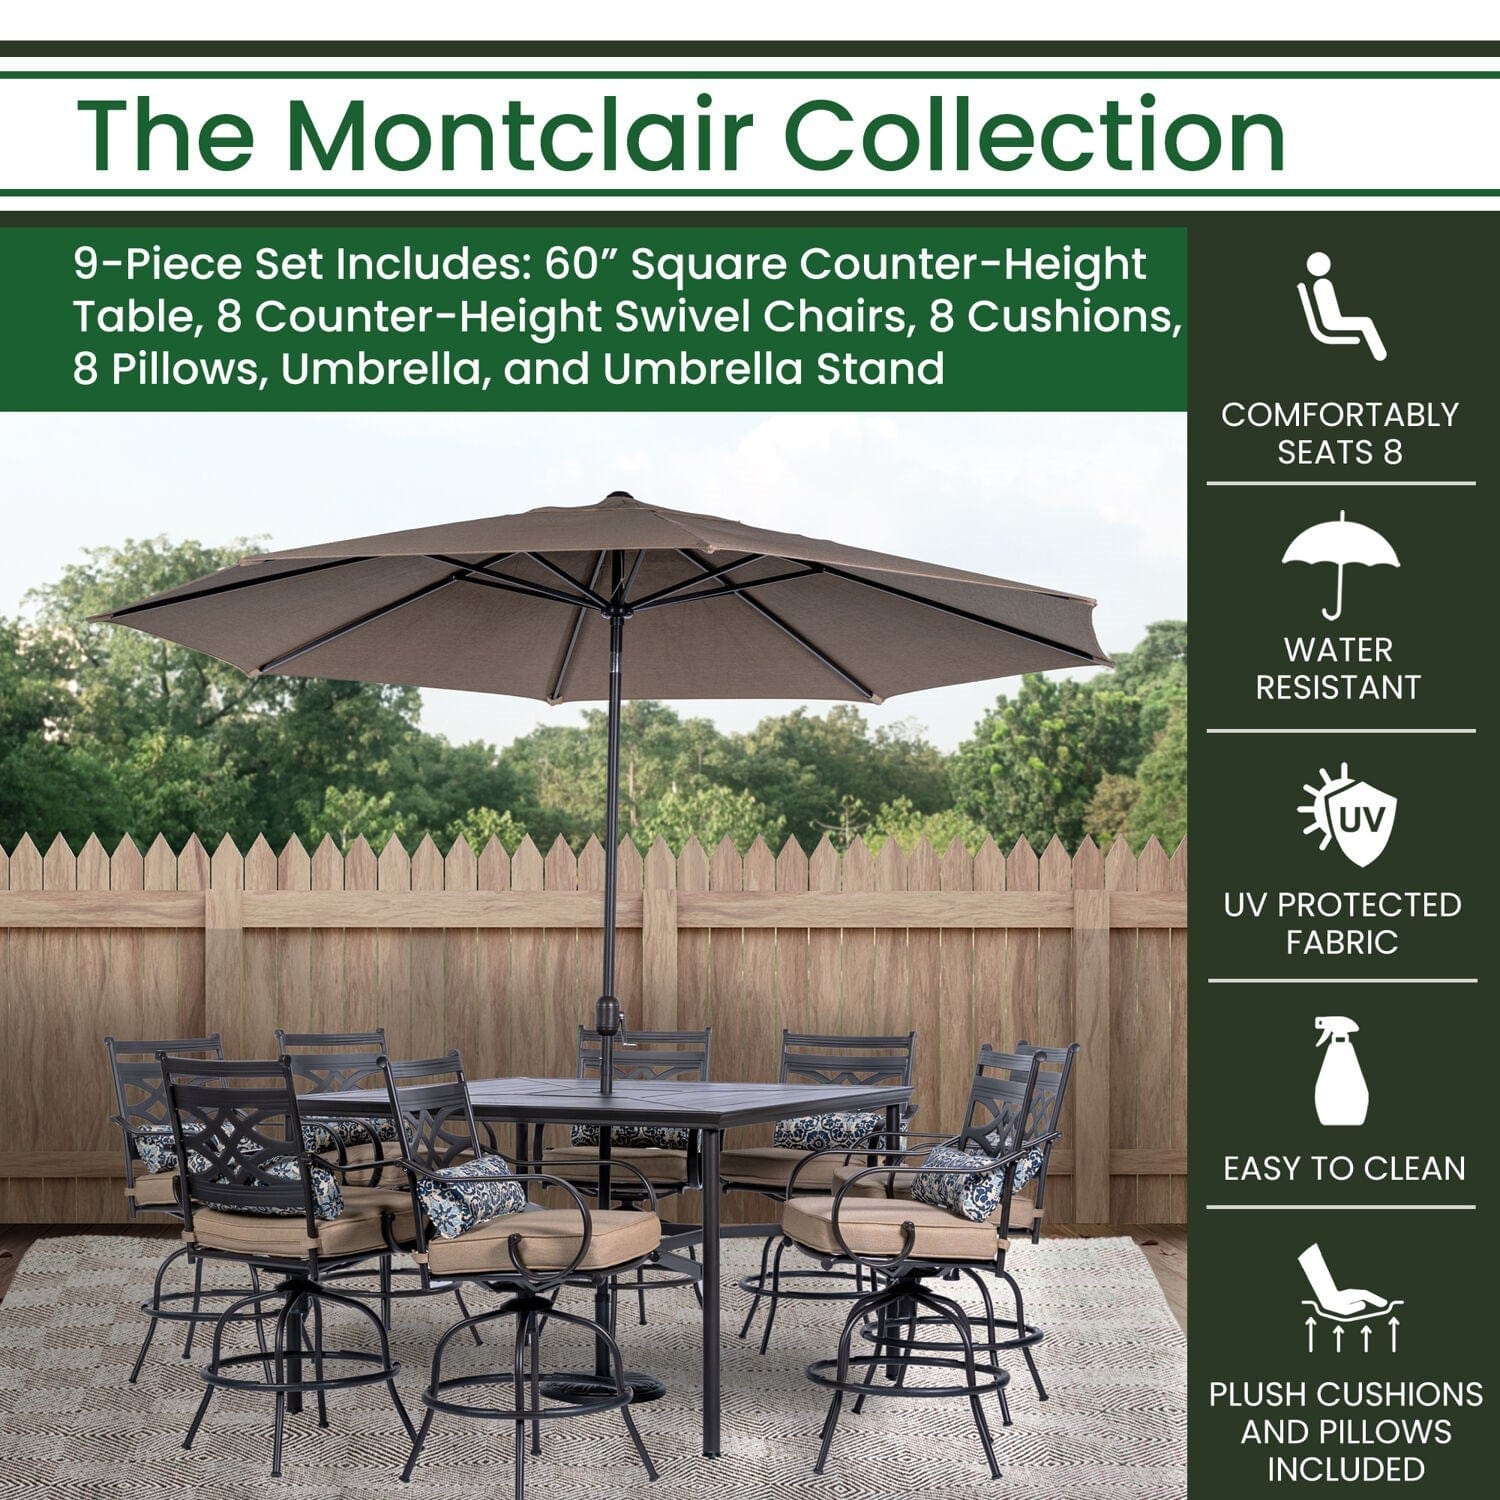 Hanover Outdoor Dining Set Hanover Montclair 9 piece High Dining: 8 Swivel Chairs, 60" High Table, Umbrella & Base - Tan/Brown MCLRDN9PCBRSW8-SU-T